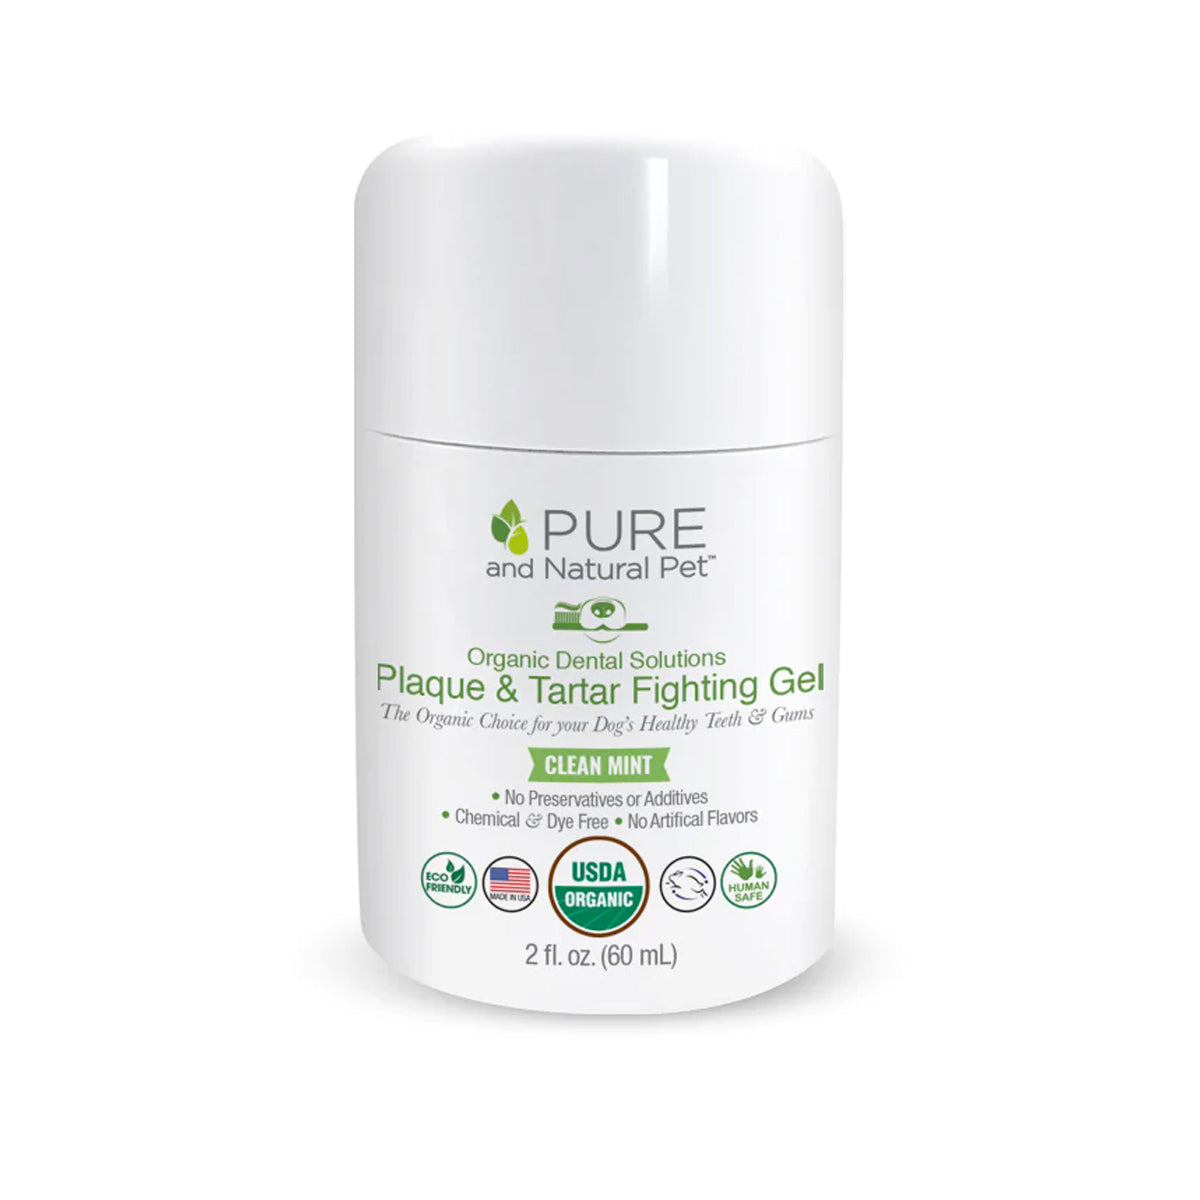 Pure and Natural Pet Organic Dental Solutions Plaque and Tartar Fighting Gel  Image